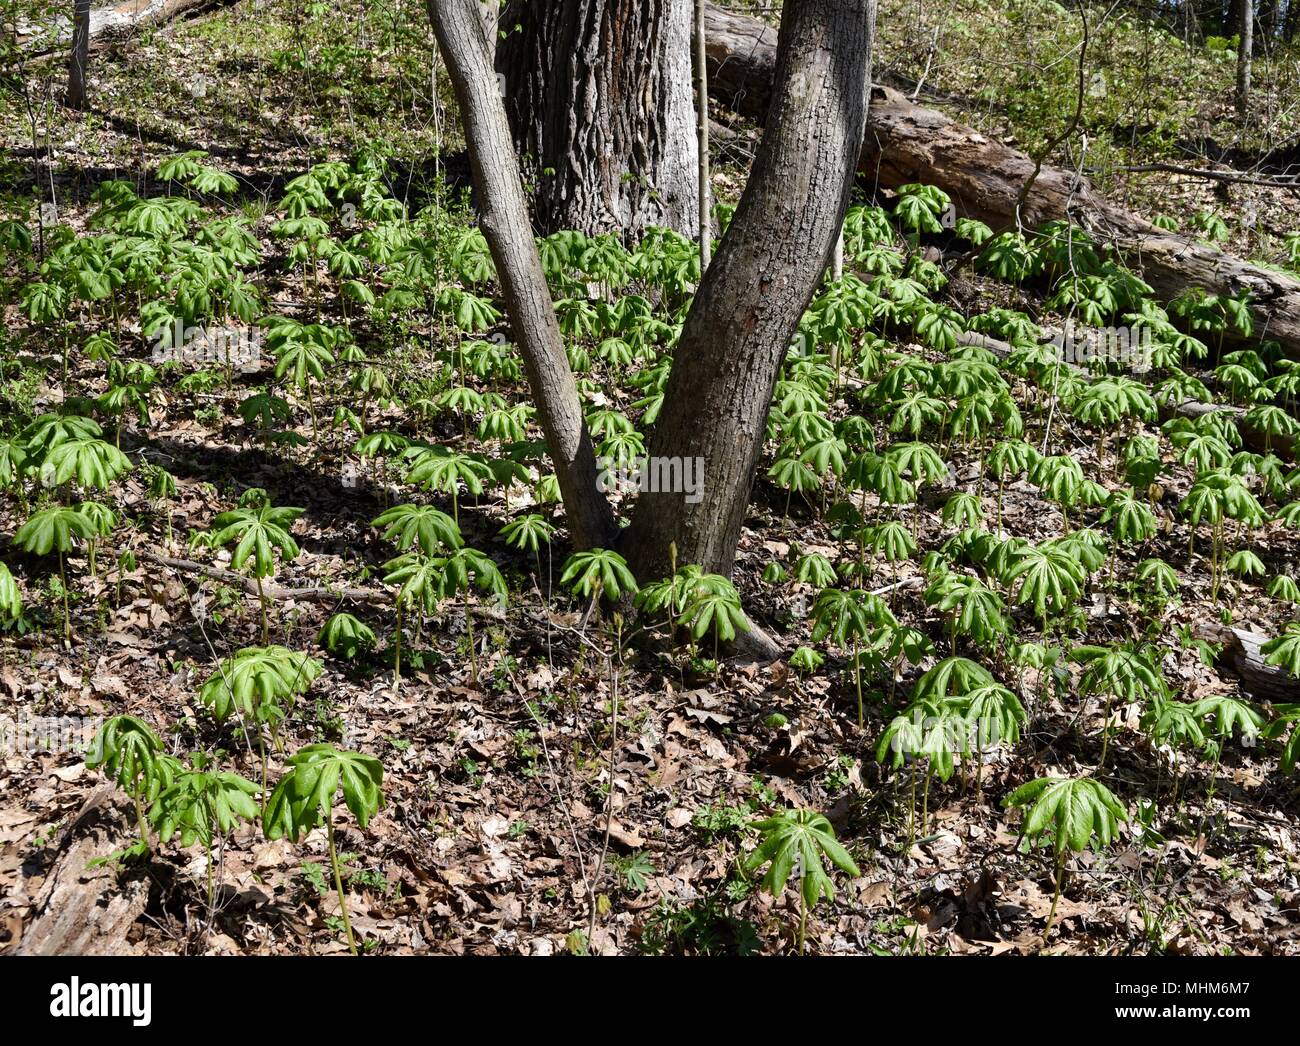 A large group of mayapple plants emerging in a spring forest. Stock Photo